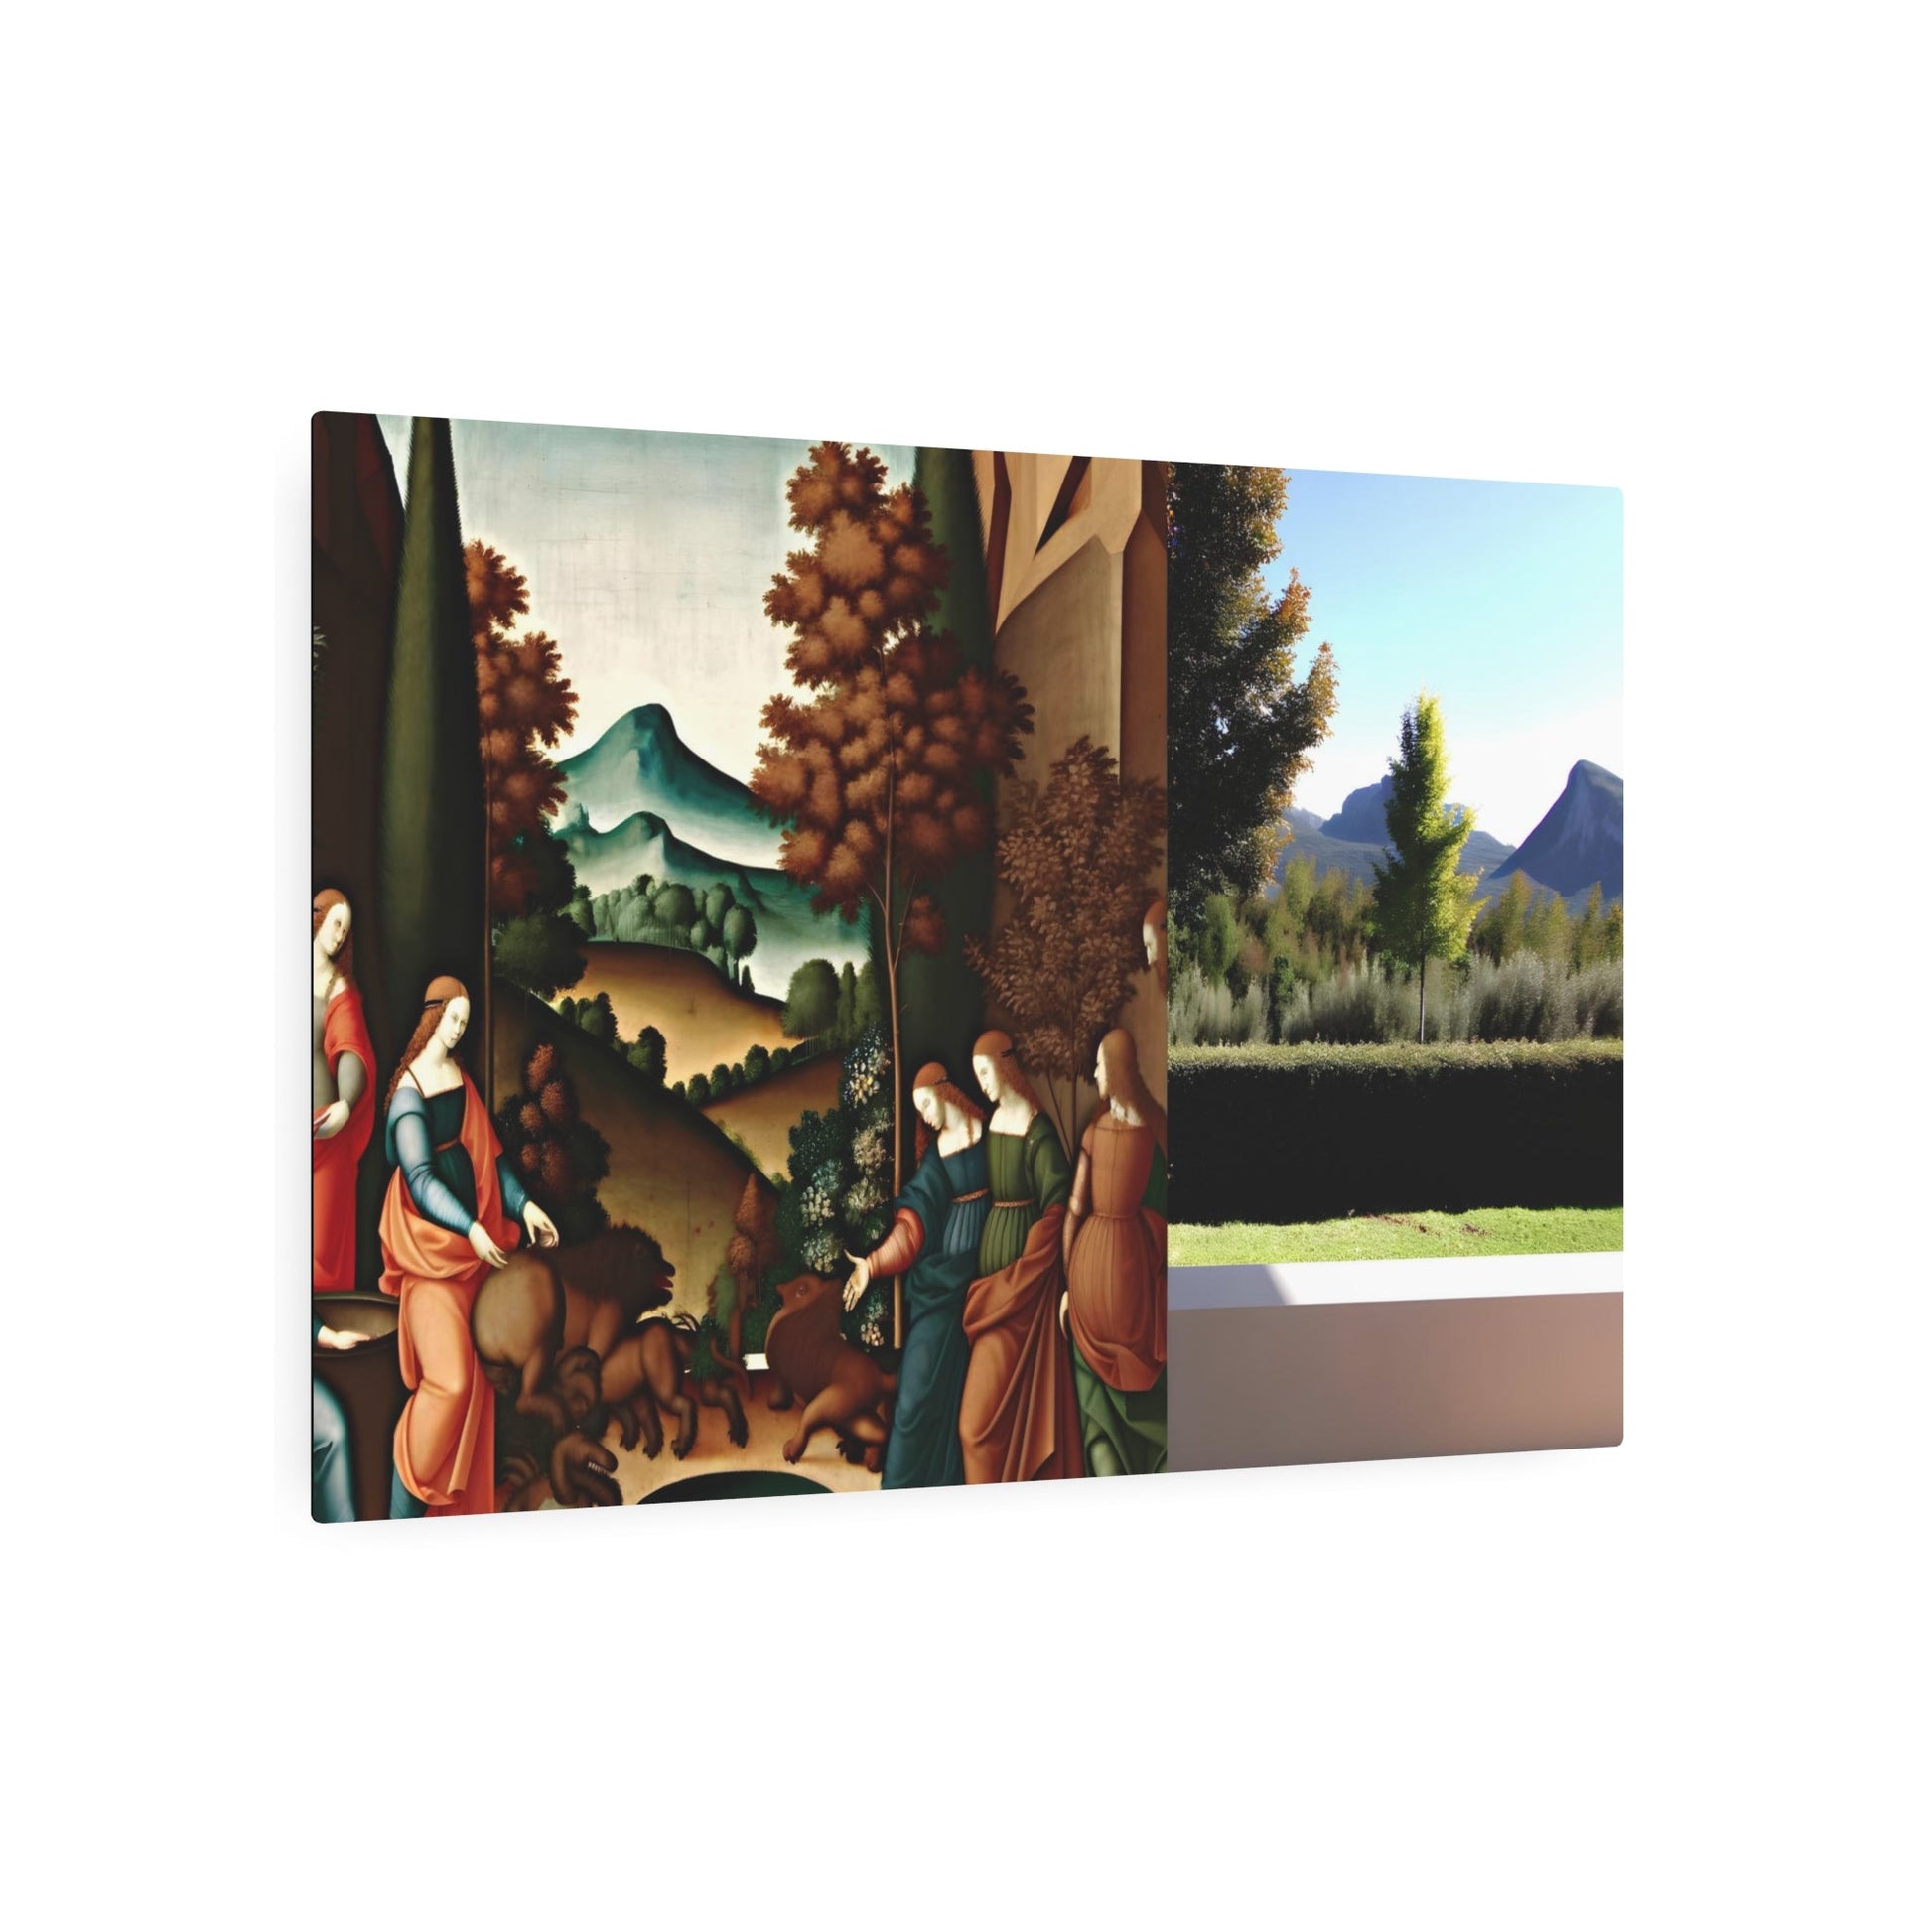 Metal Poster Art | "Renaissance Art Revival: A Masterpiece Embodying the Intricate Techniques and Themes of Western Renaissance Art Styles" - Metal Poster Art 36″ x 24″ (Horizontal) 0.12''